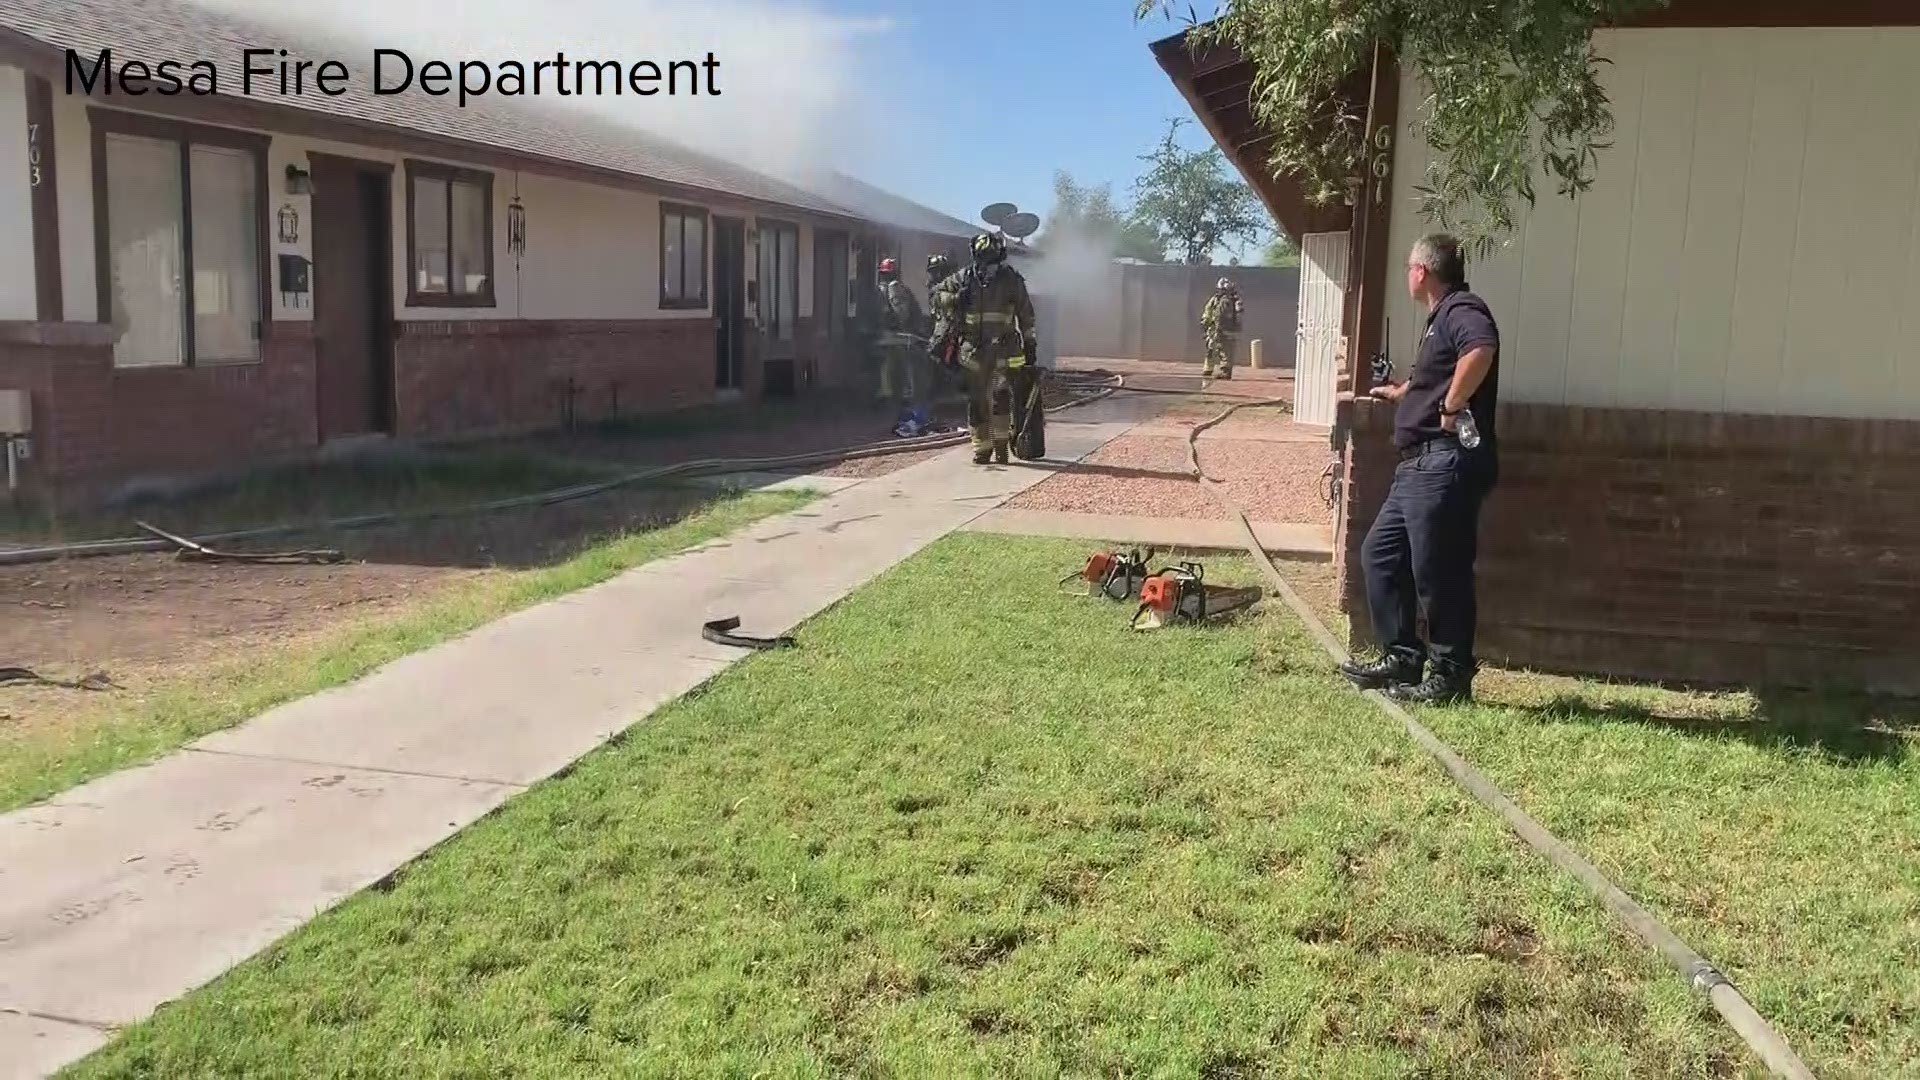 Fire crews managed to rescue a young boy from a burning apartment on Thursday.